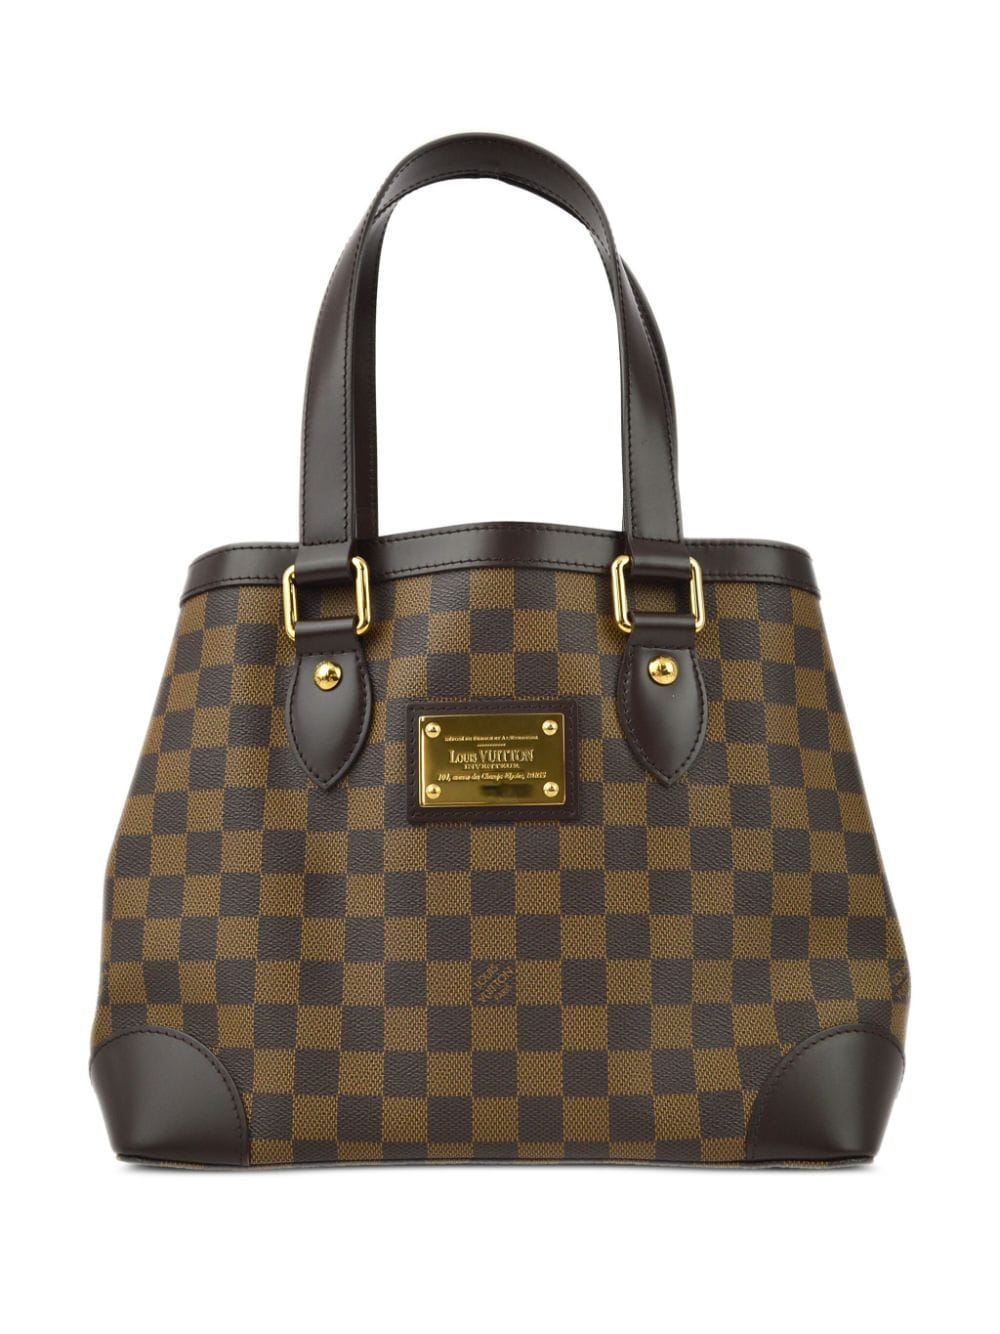 Pre-owned Louis Vuitton 2009 Hampstead Pm Tote Bag In Brown